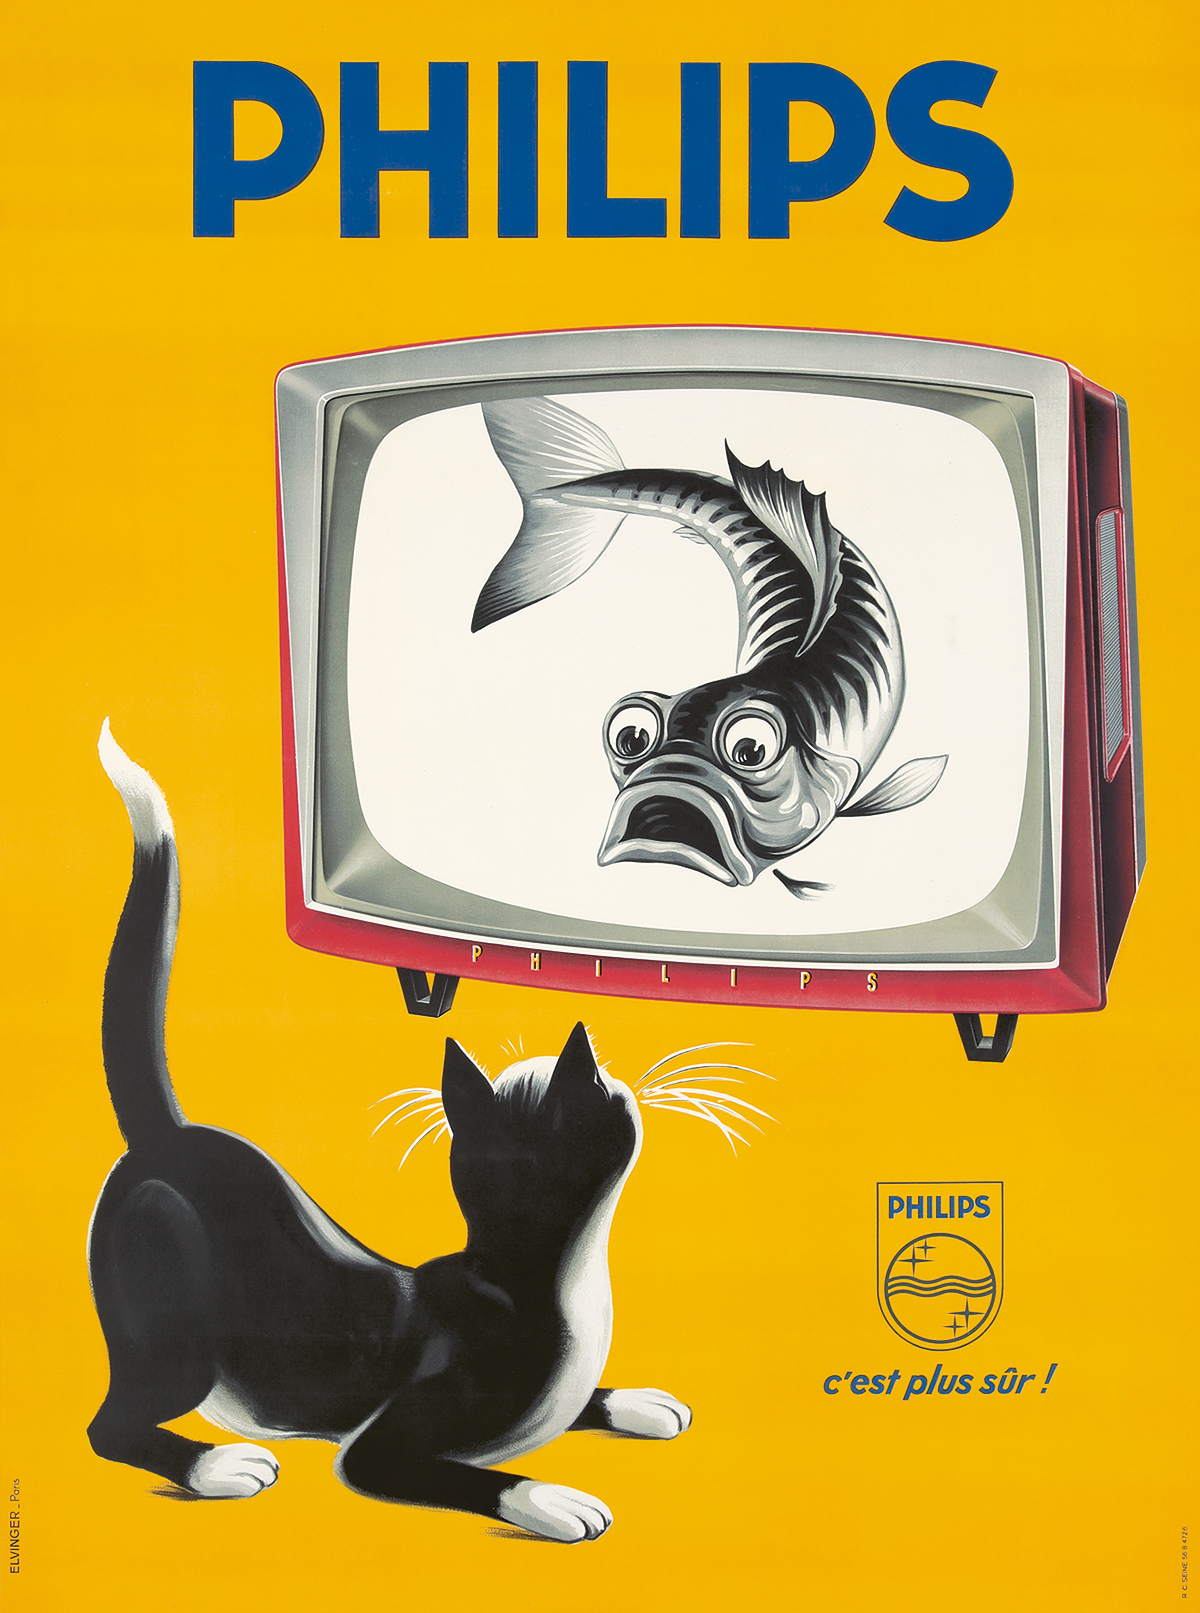 Philips. | Poster Auctions International, Inc.